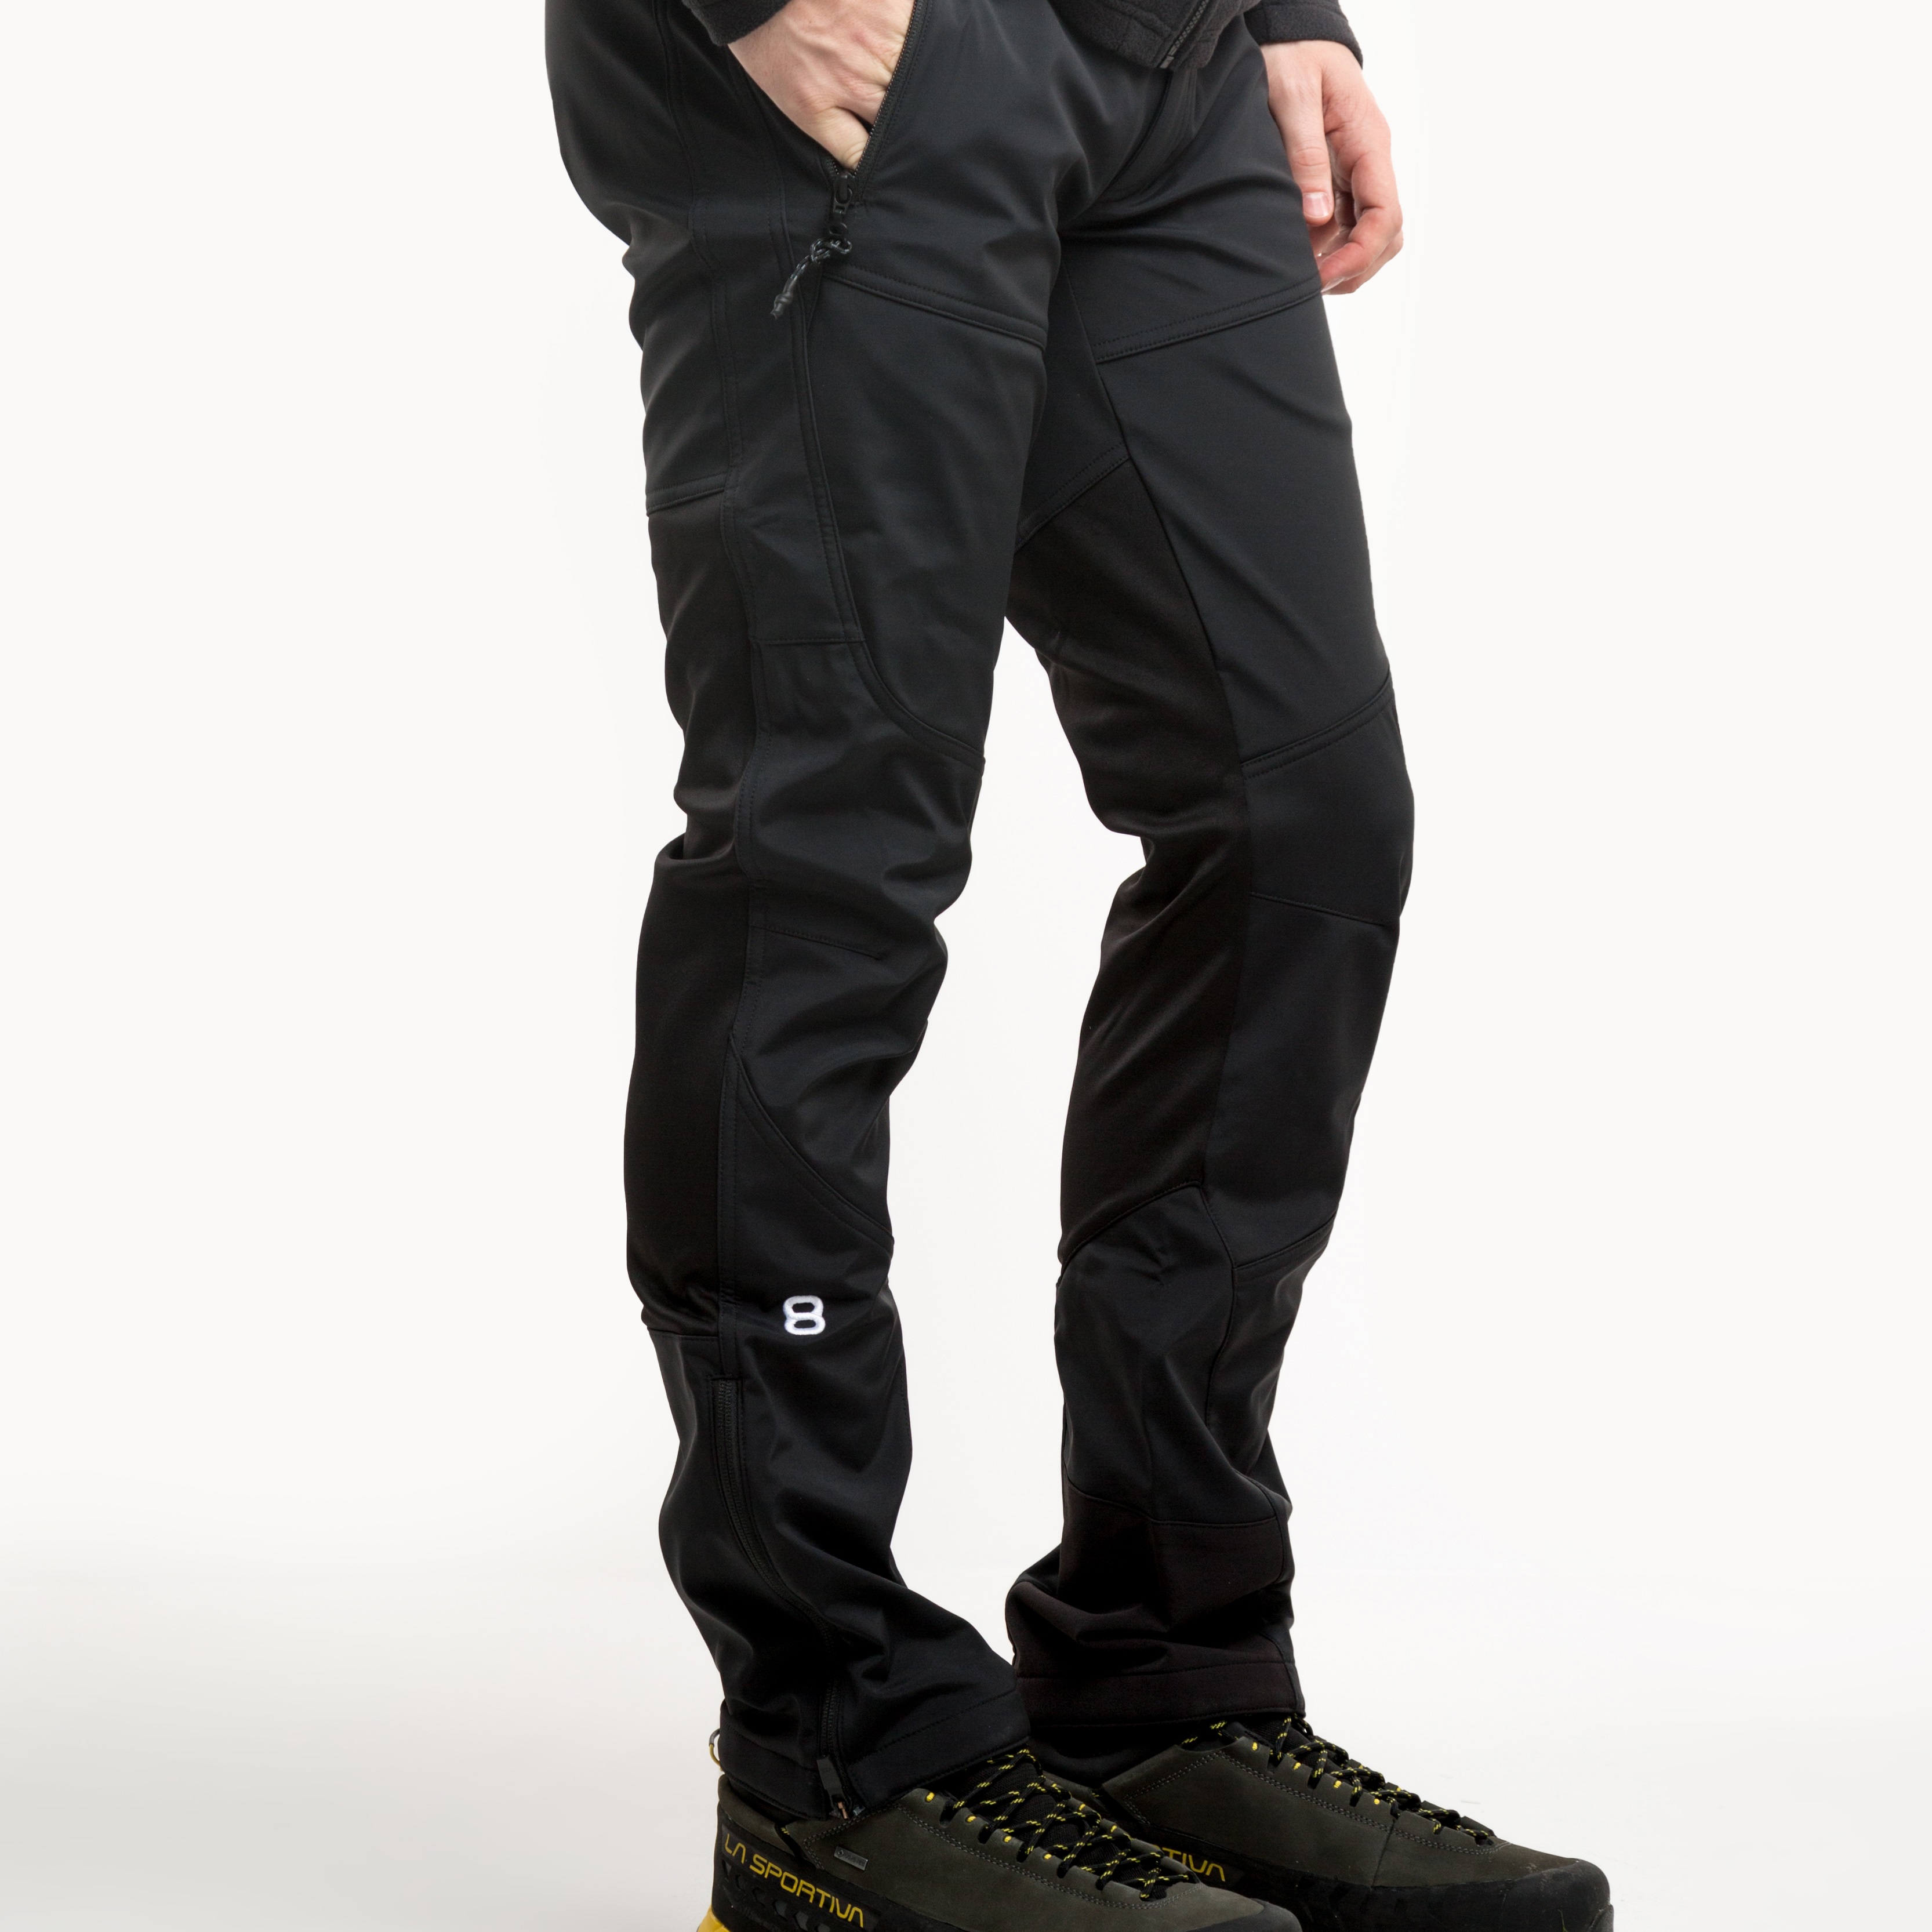 Men's Unlimitech windproof ski touring pants in Stretch Performance